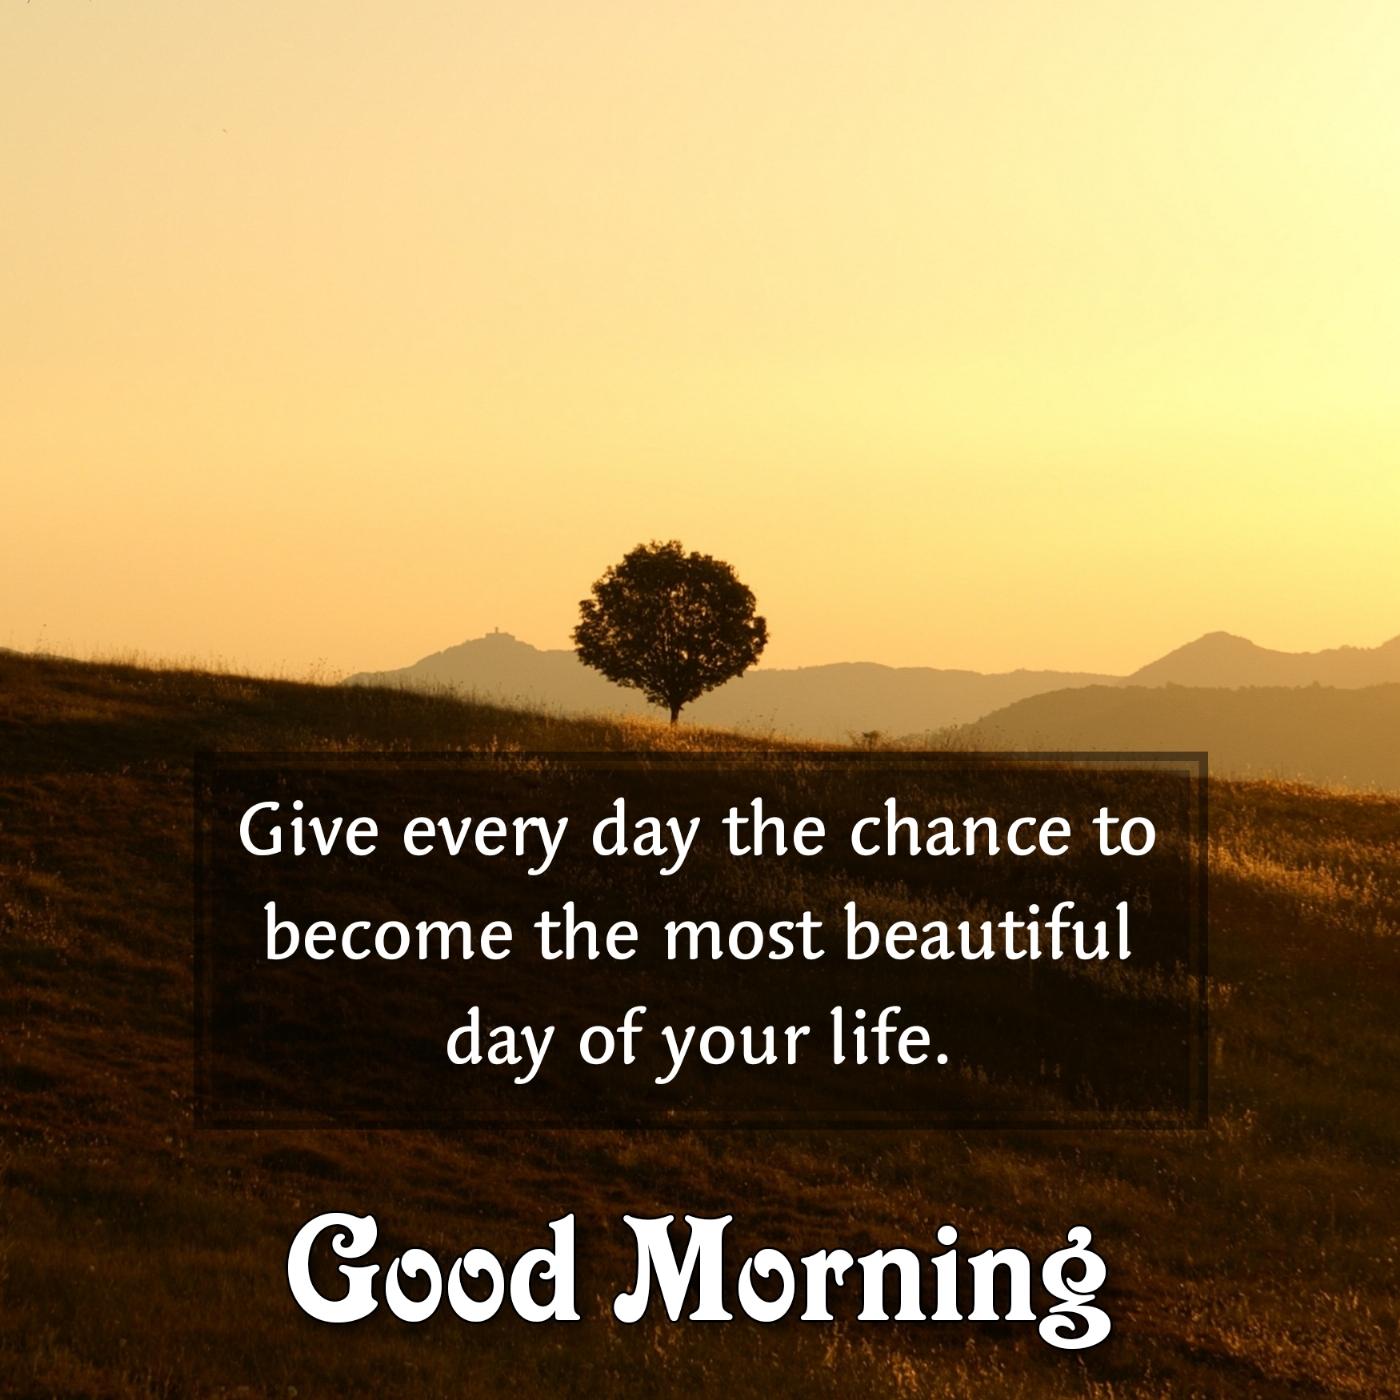 Give every day the chance to become the most beautiful day